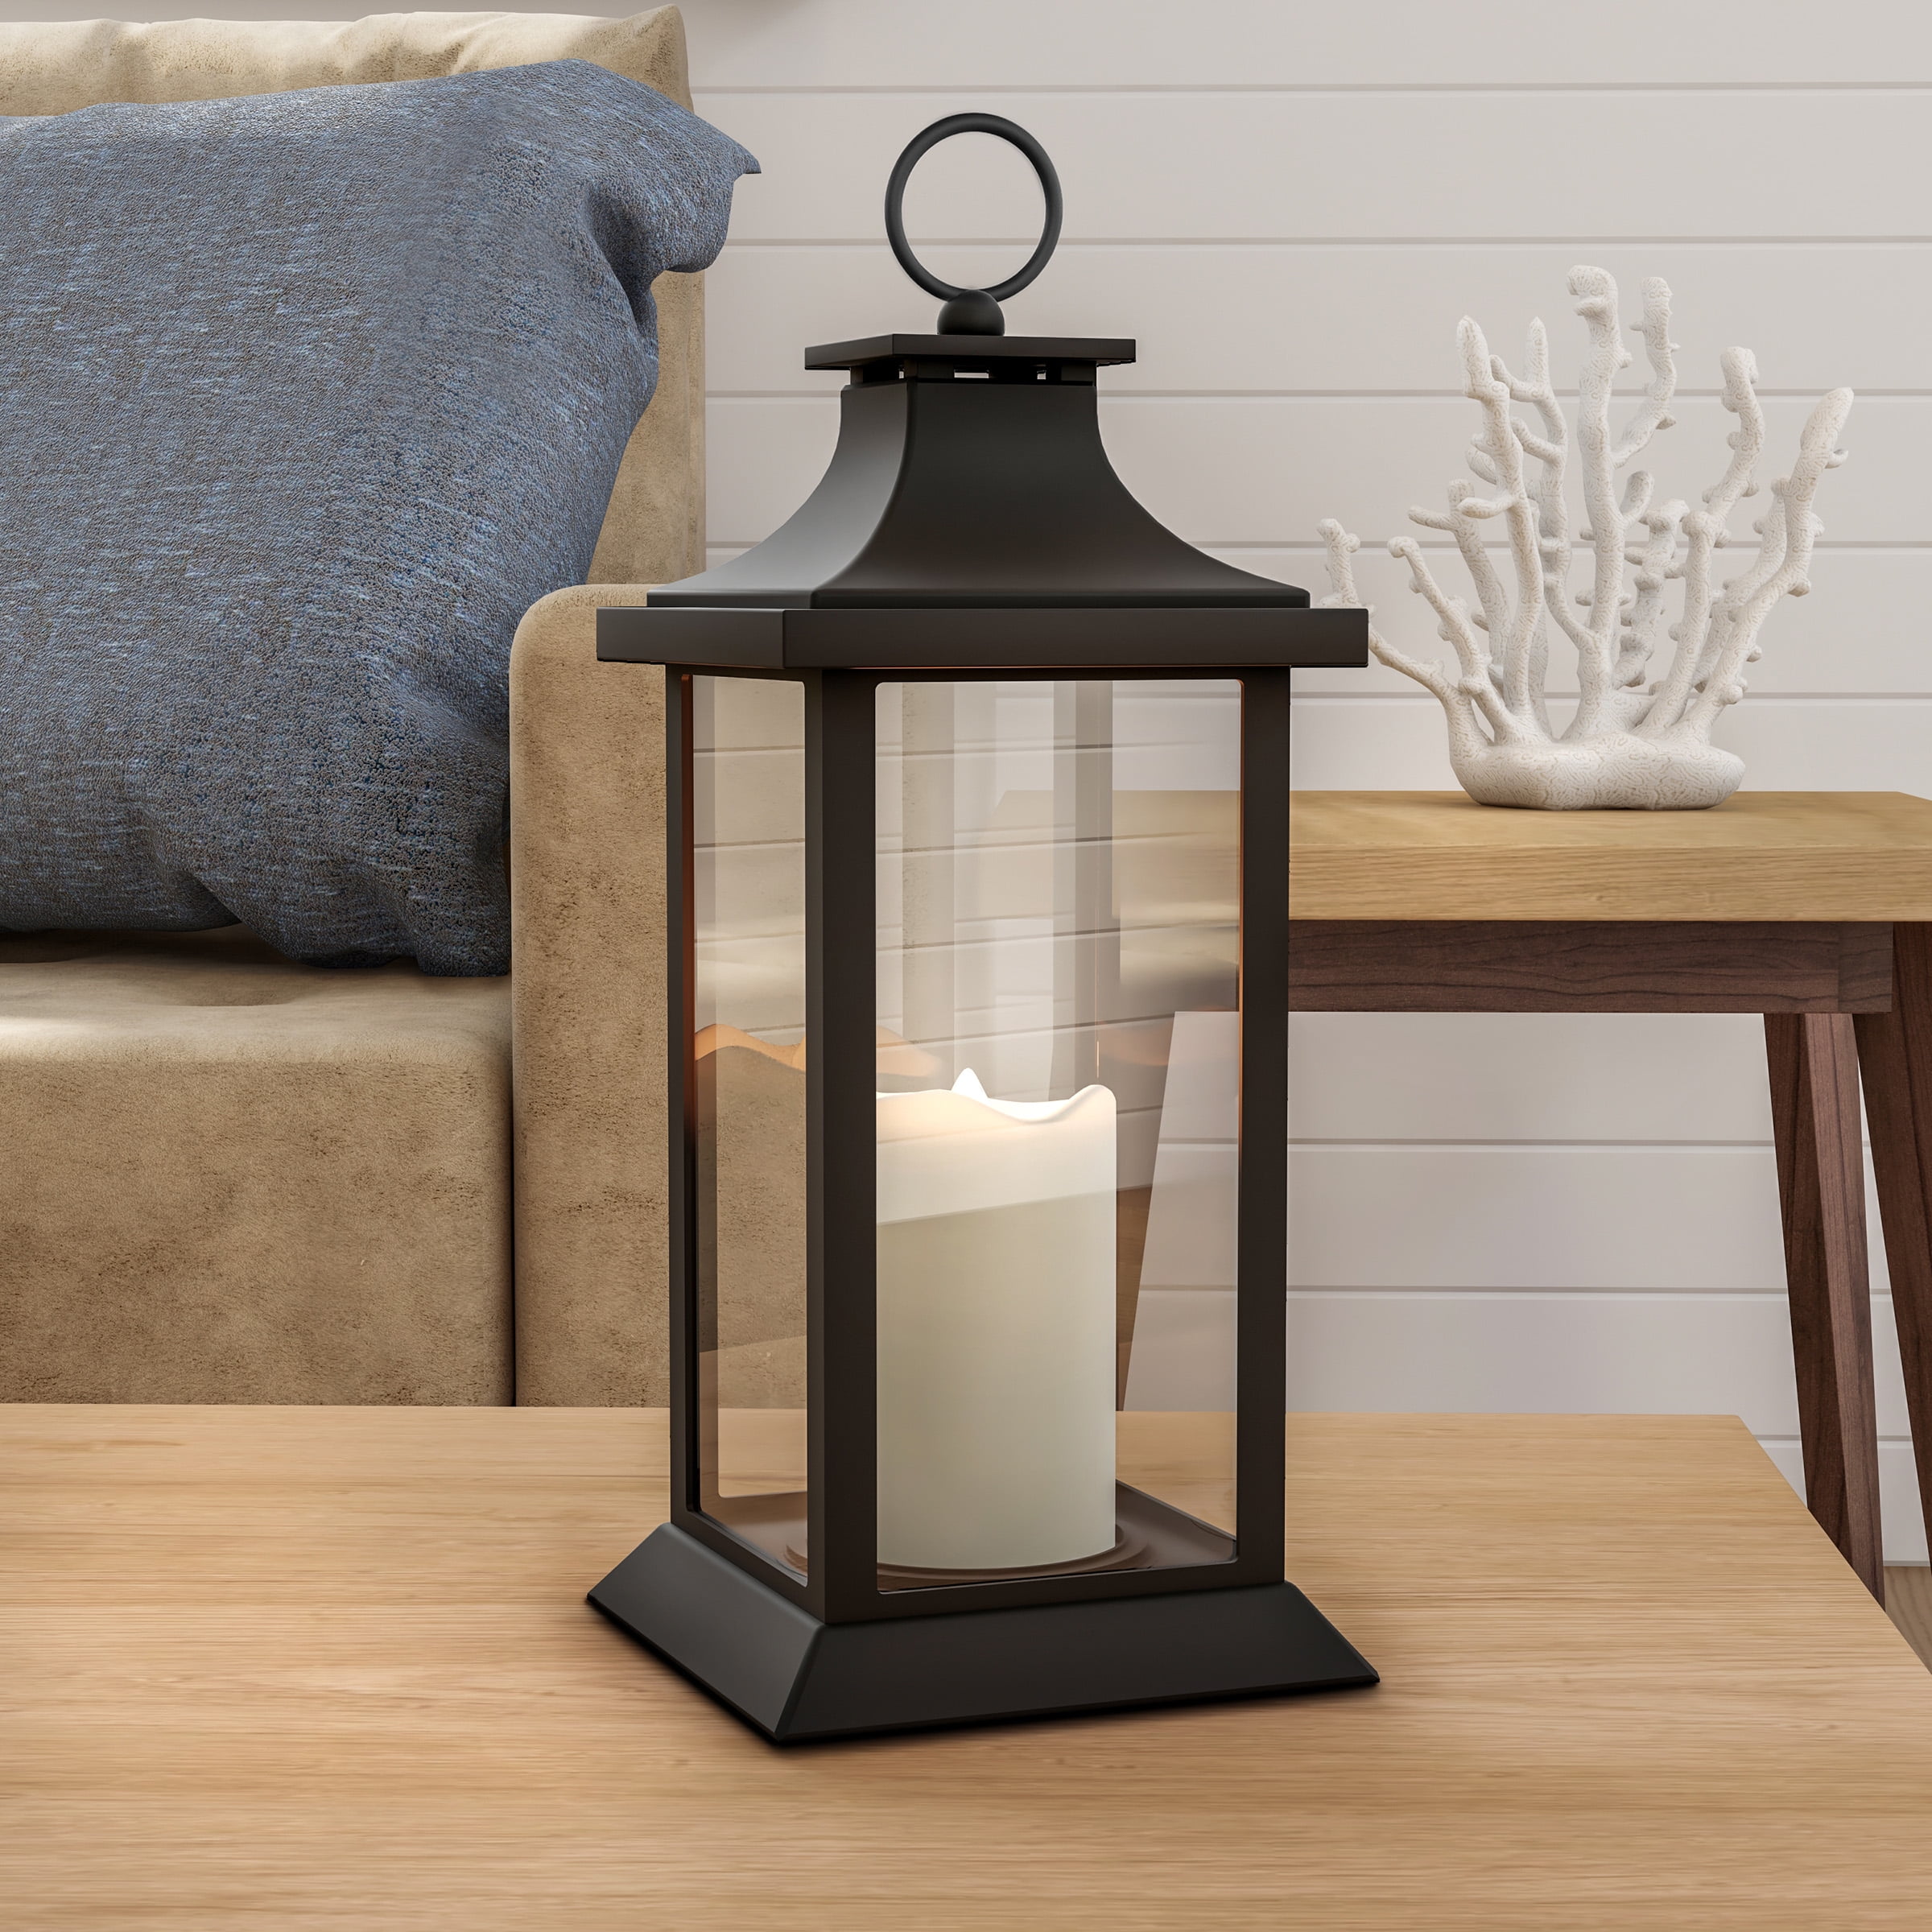 Decorative Sentiment Lantern LED Pillar Candle Hanging or Tabletop in 3 CHOICES 